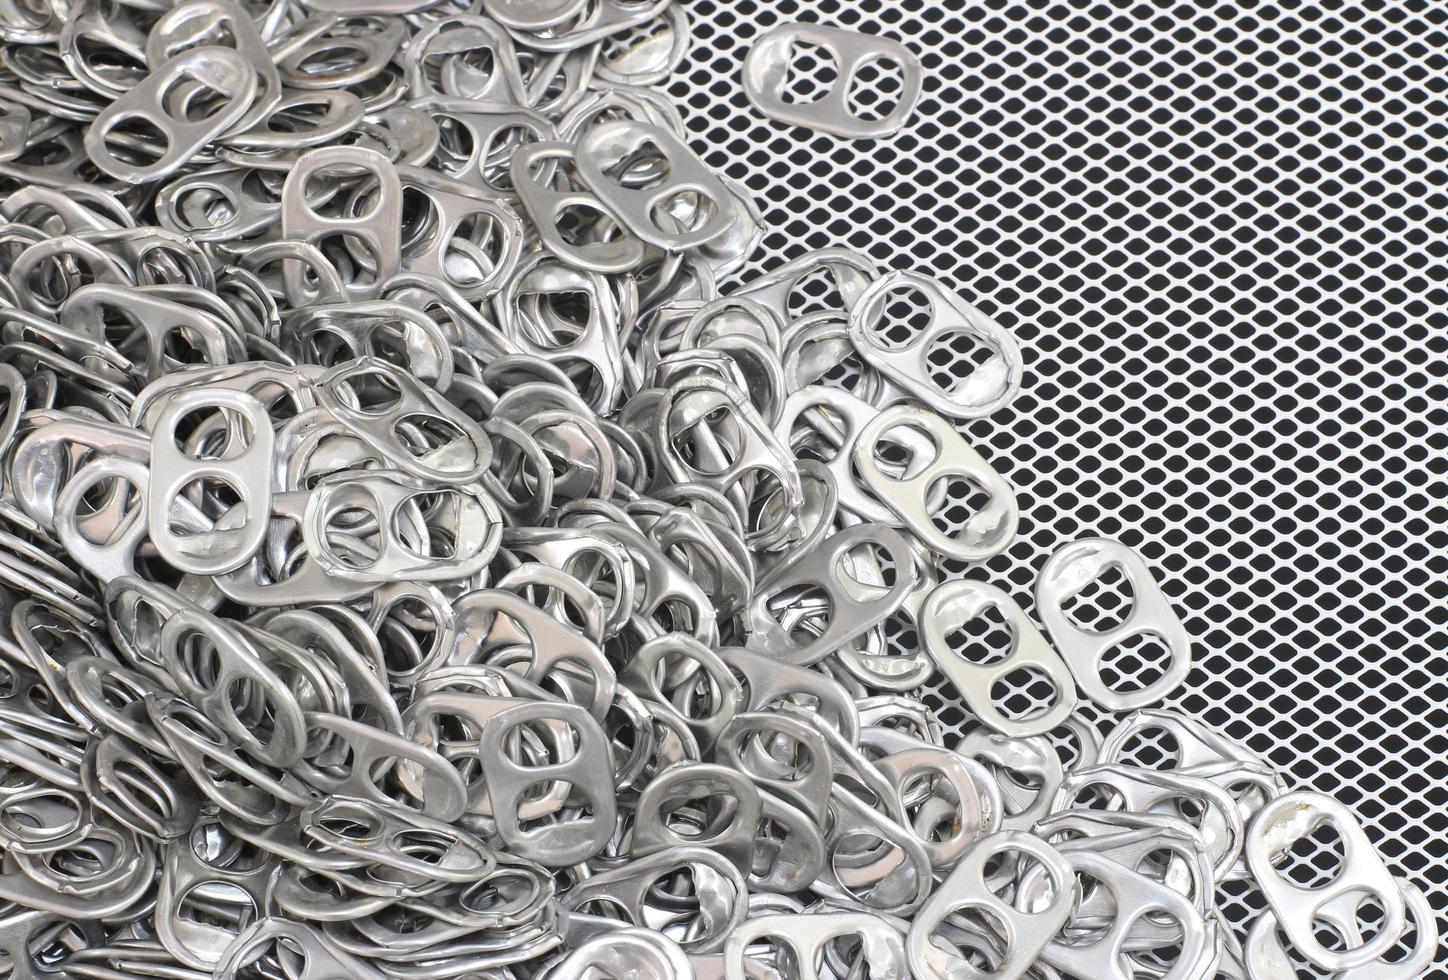 Can tabs on metal photo